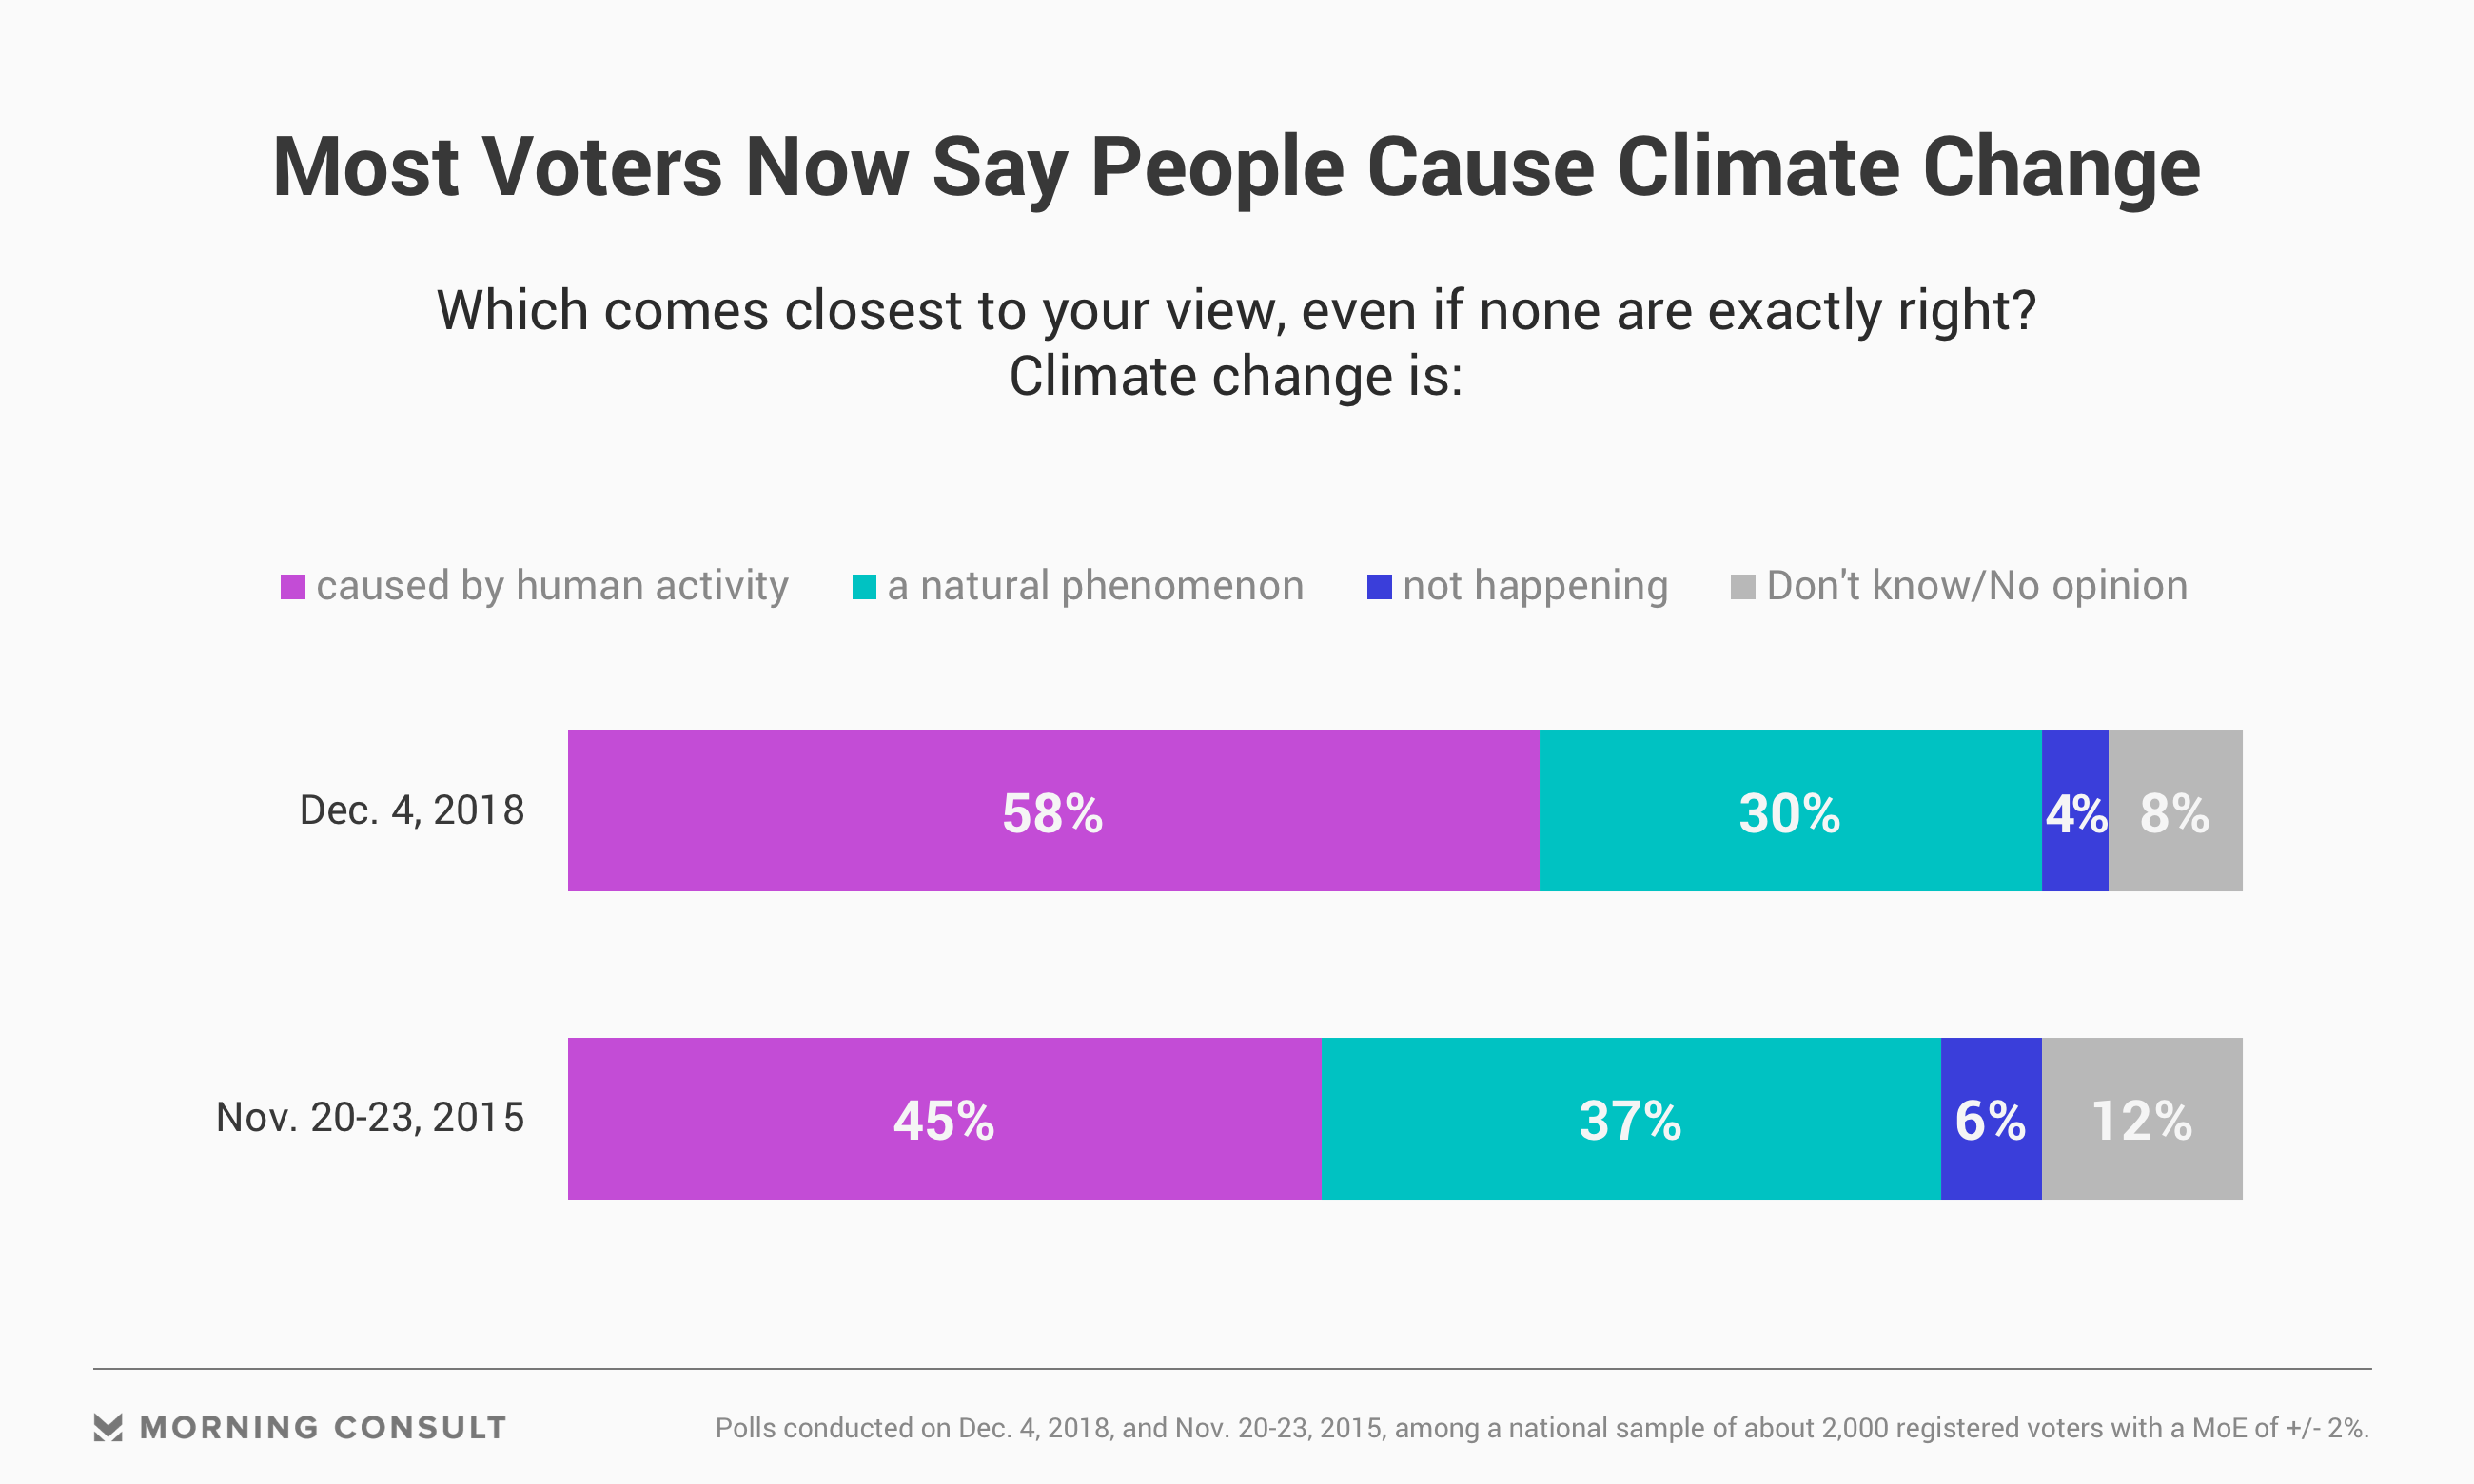 More Voters Linking Human Activity to Climate Change